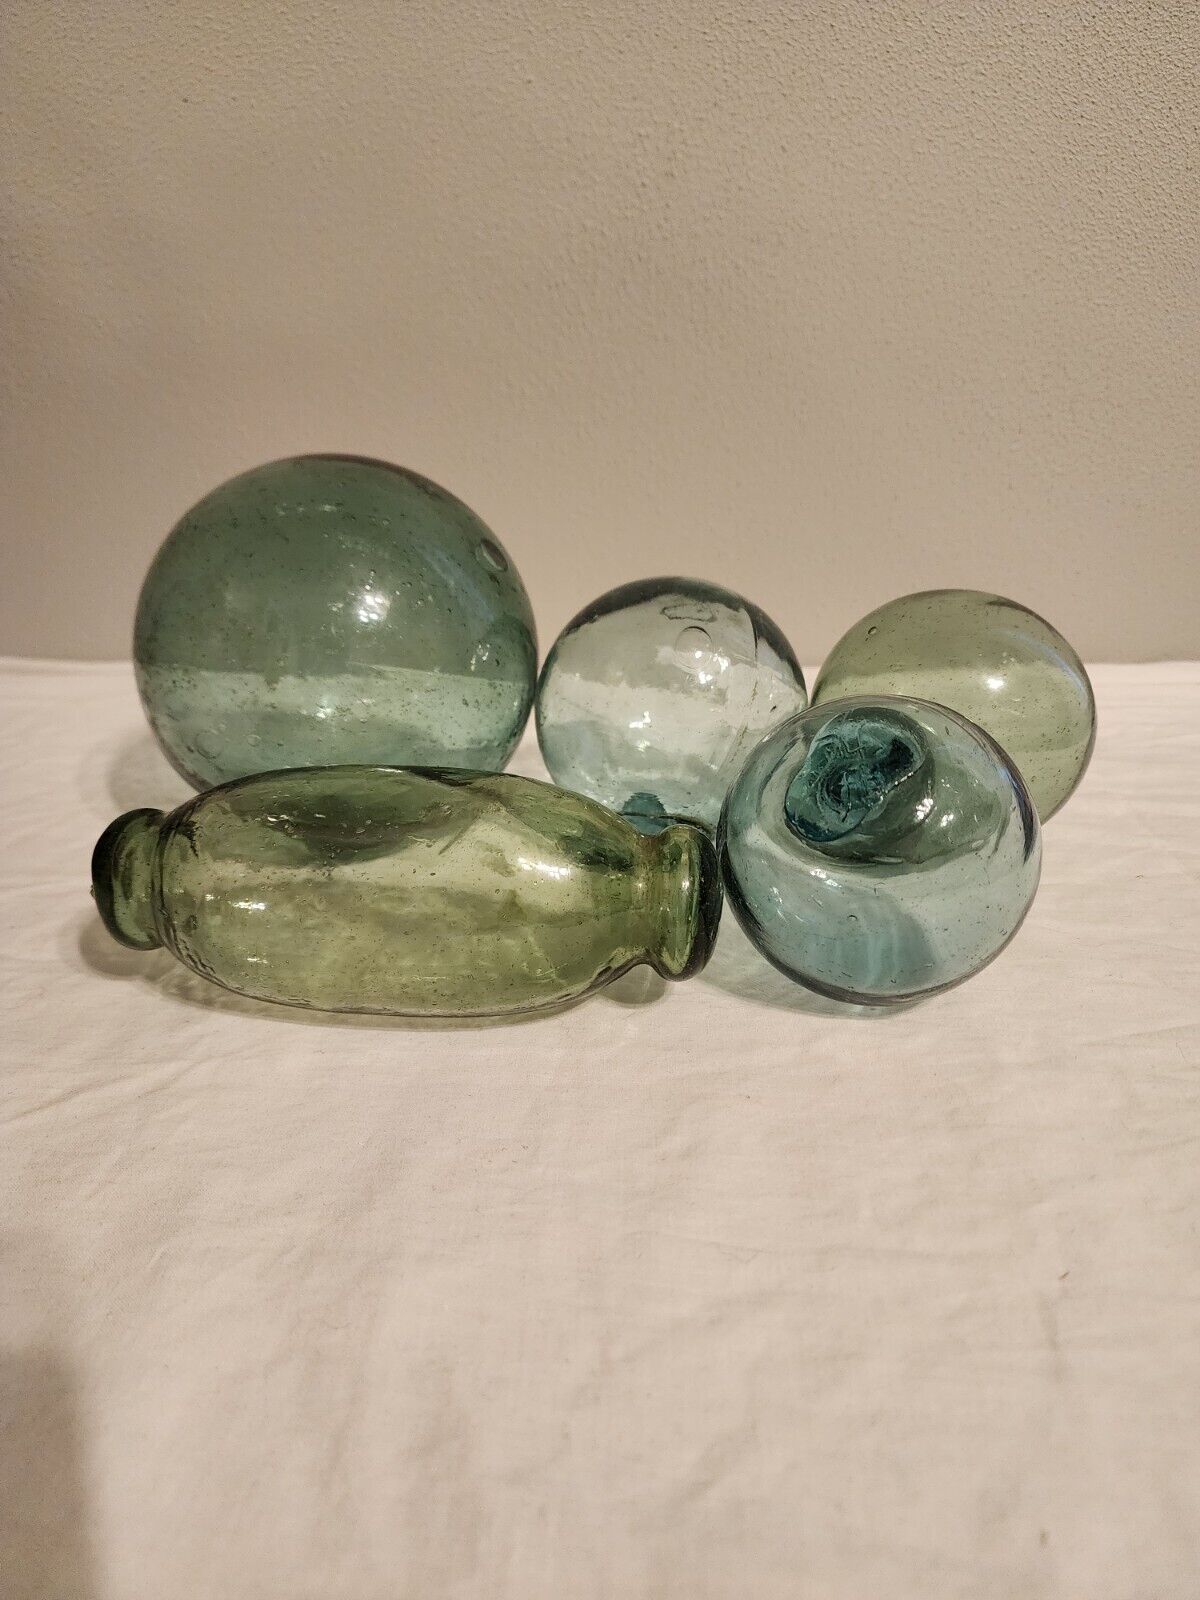 Lot of 5 Vintage Blue/Green Glass Fishing Buoy Floats